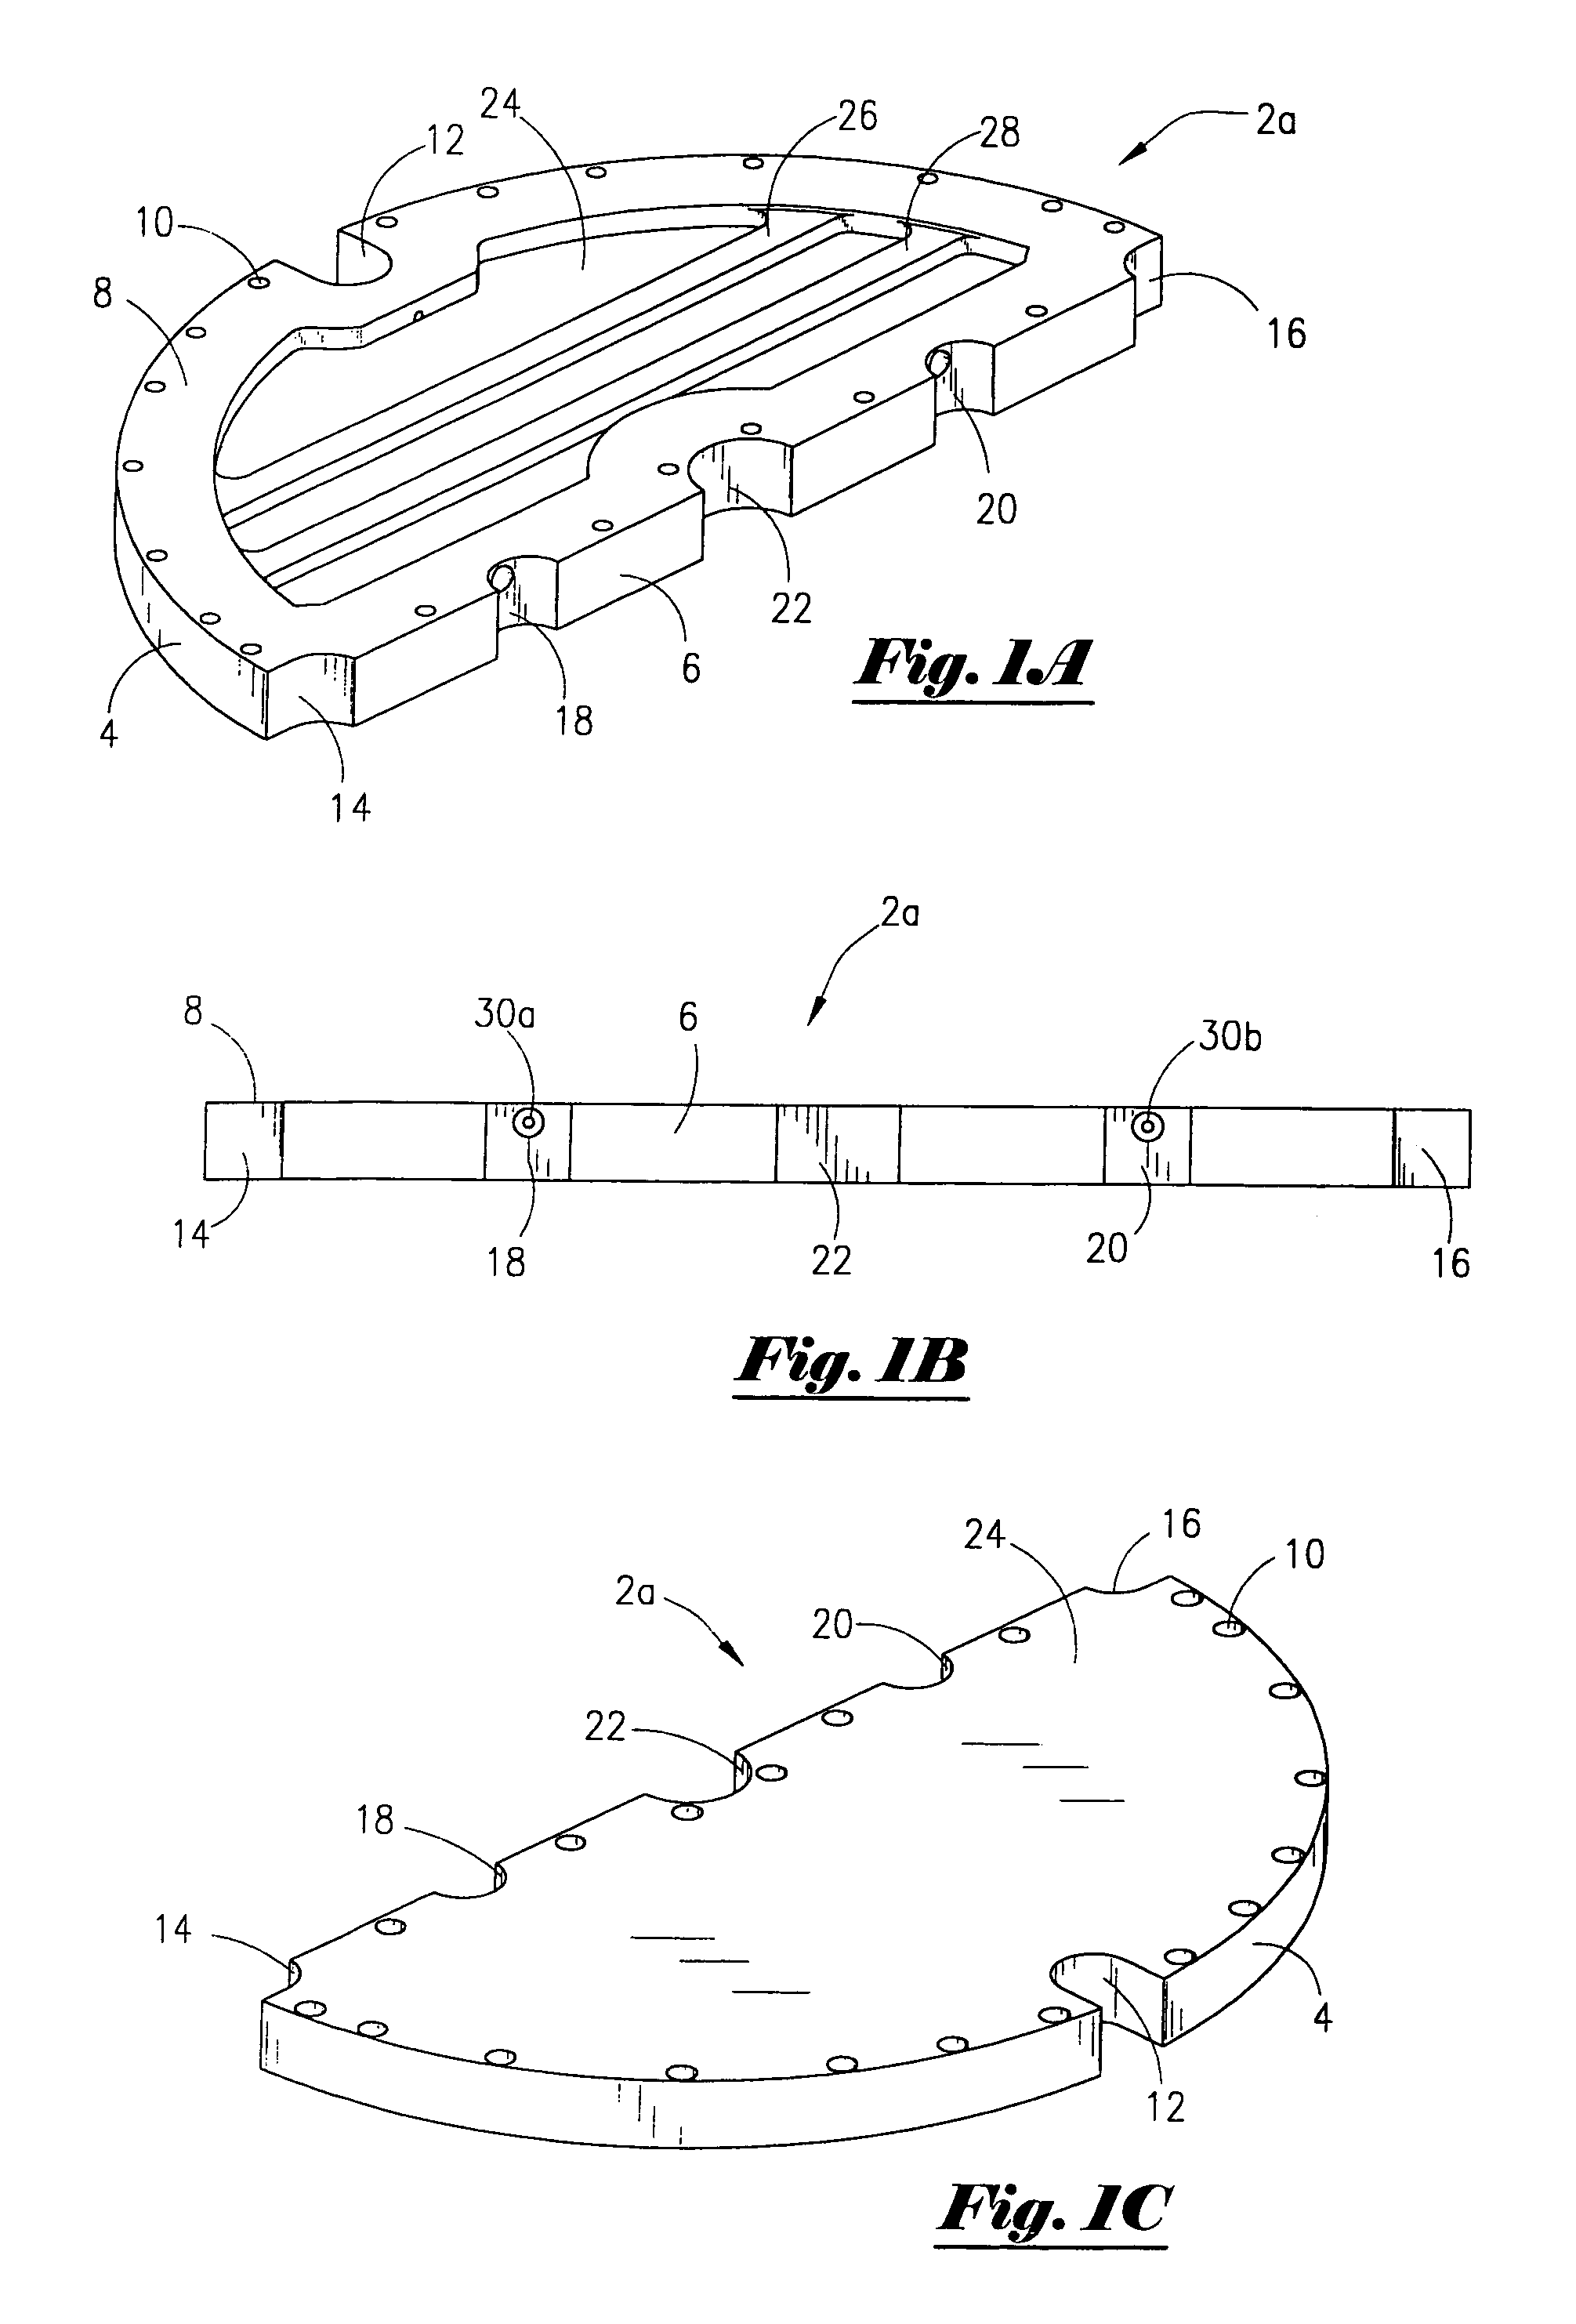 Method and apparatus for separating aromatic hydrocarbons in an isothermal system